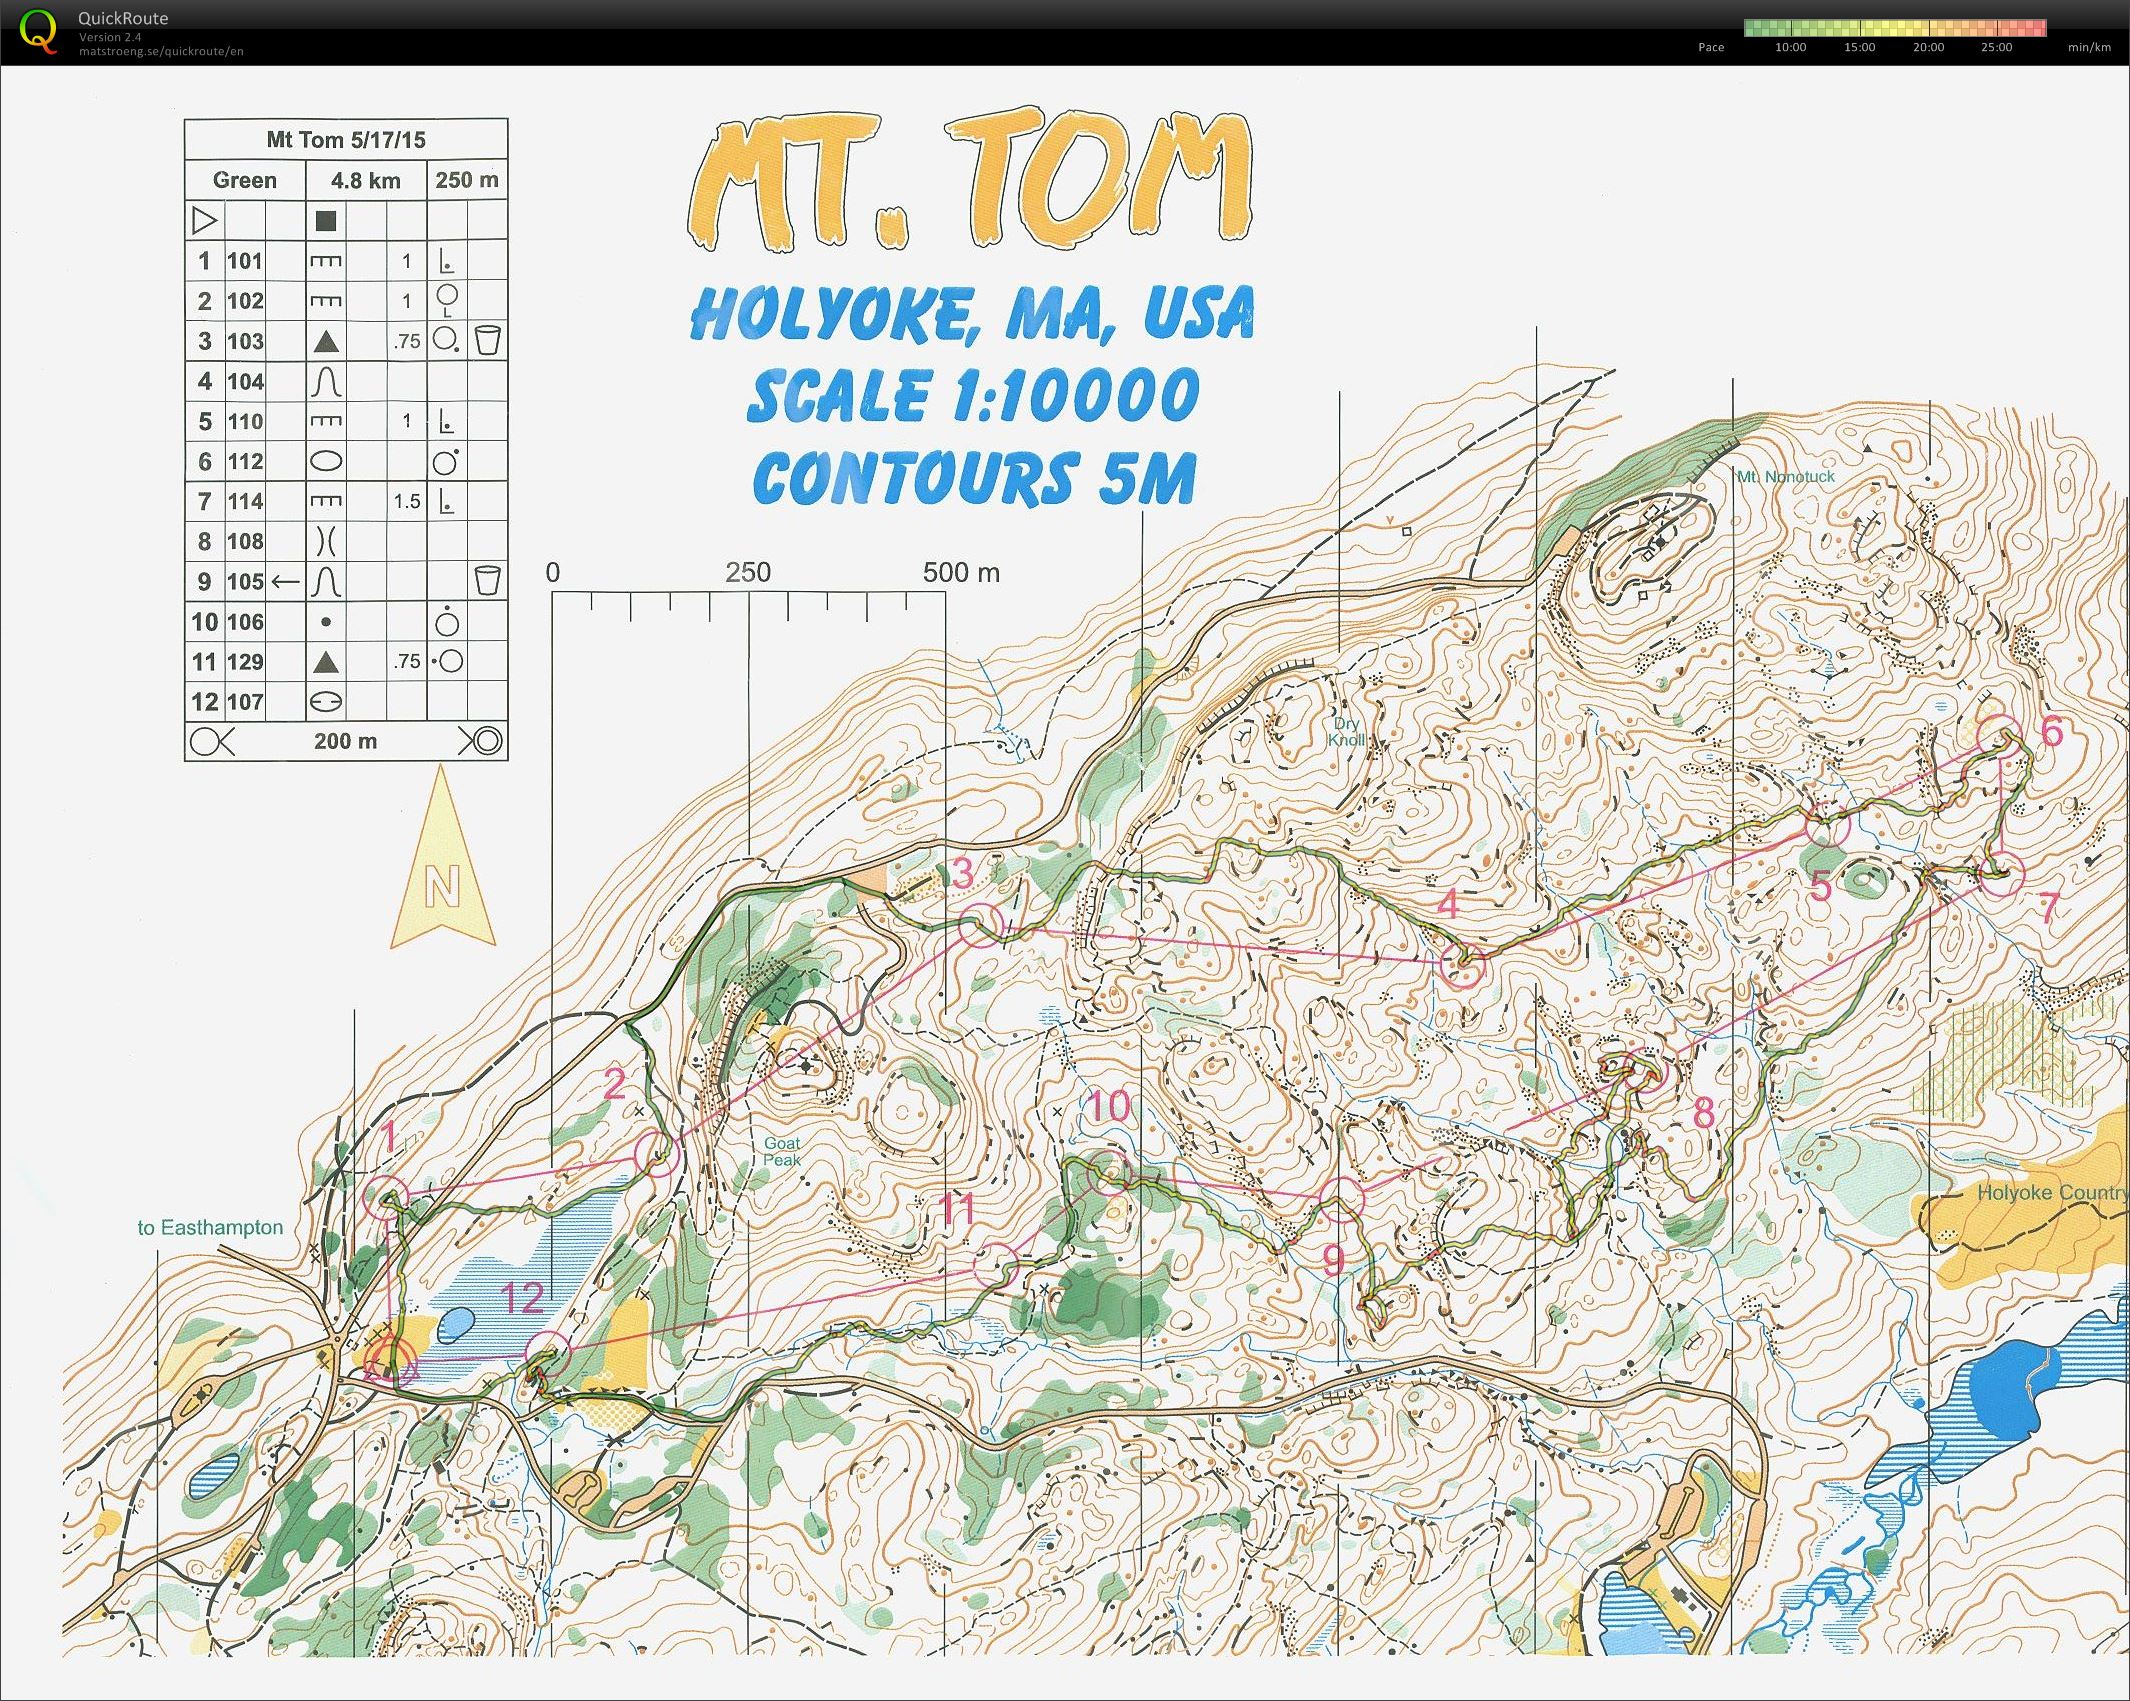 Mt Tom Green course (18.05.2015)